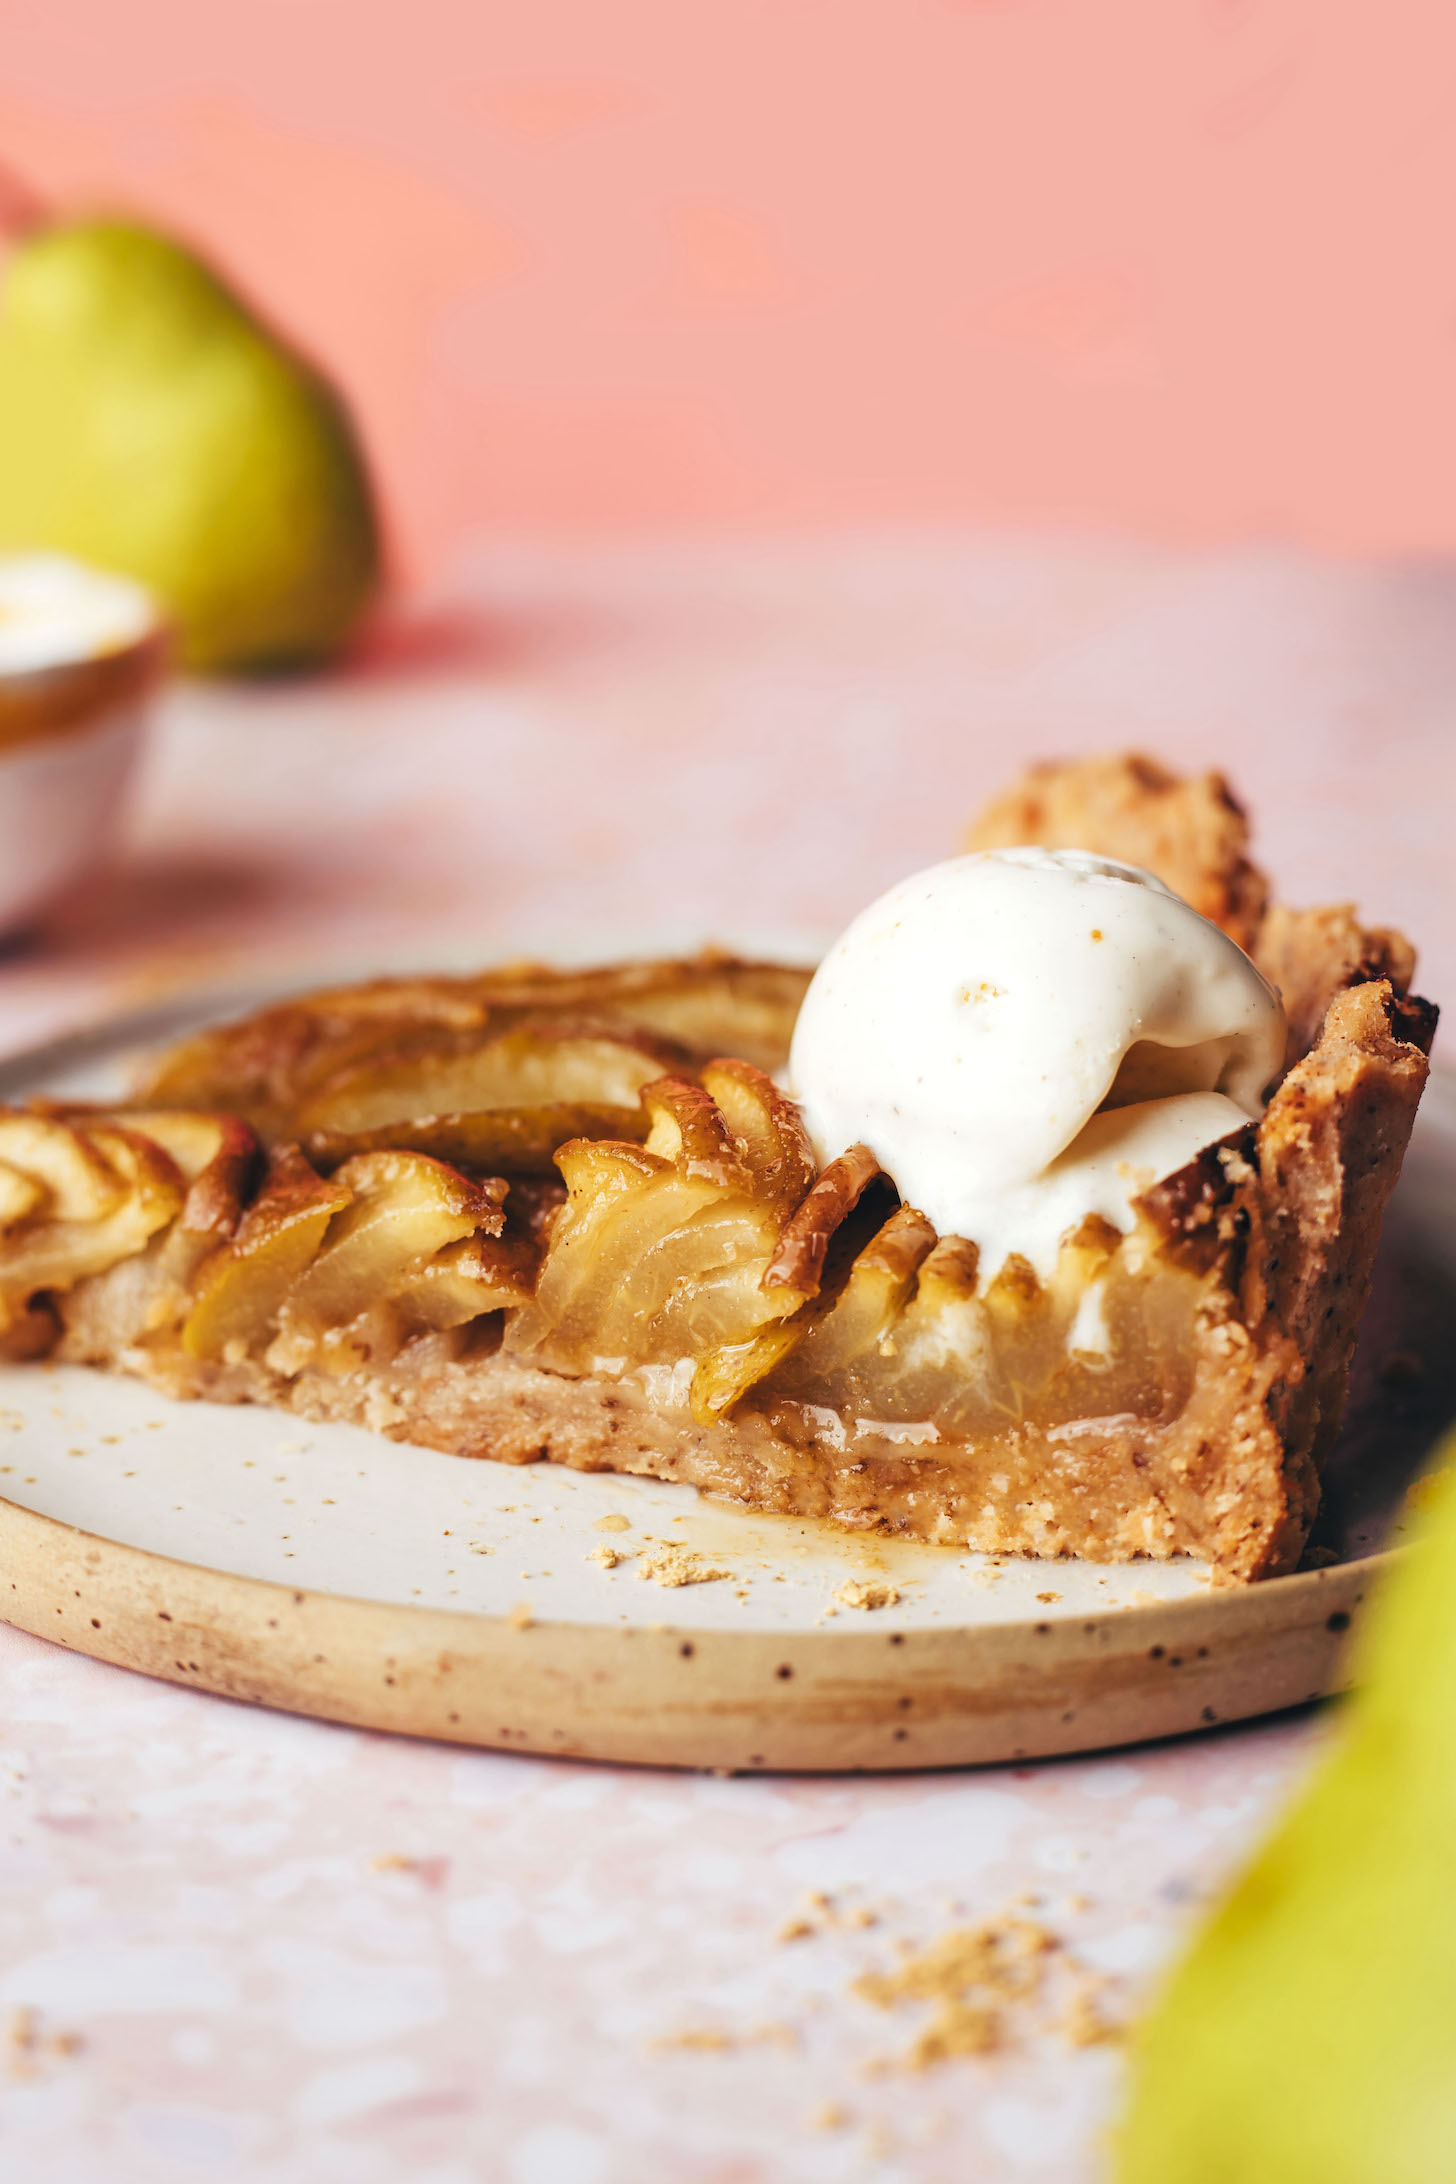 Slice of gluten-free ginger pear tart topped with a scoop of vegan vanilla ice cream